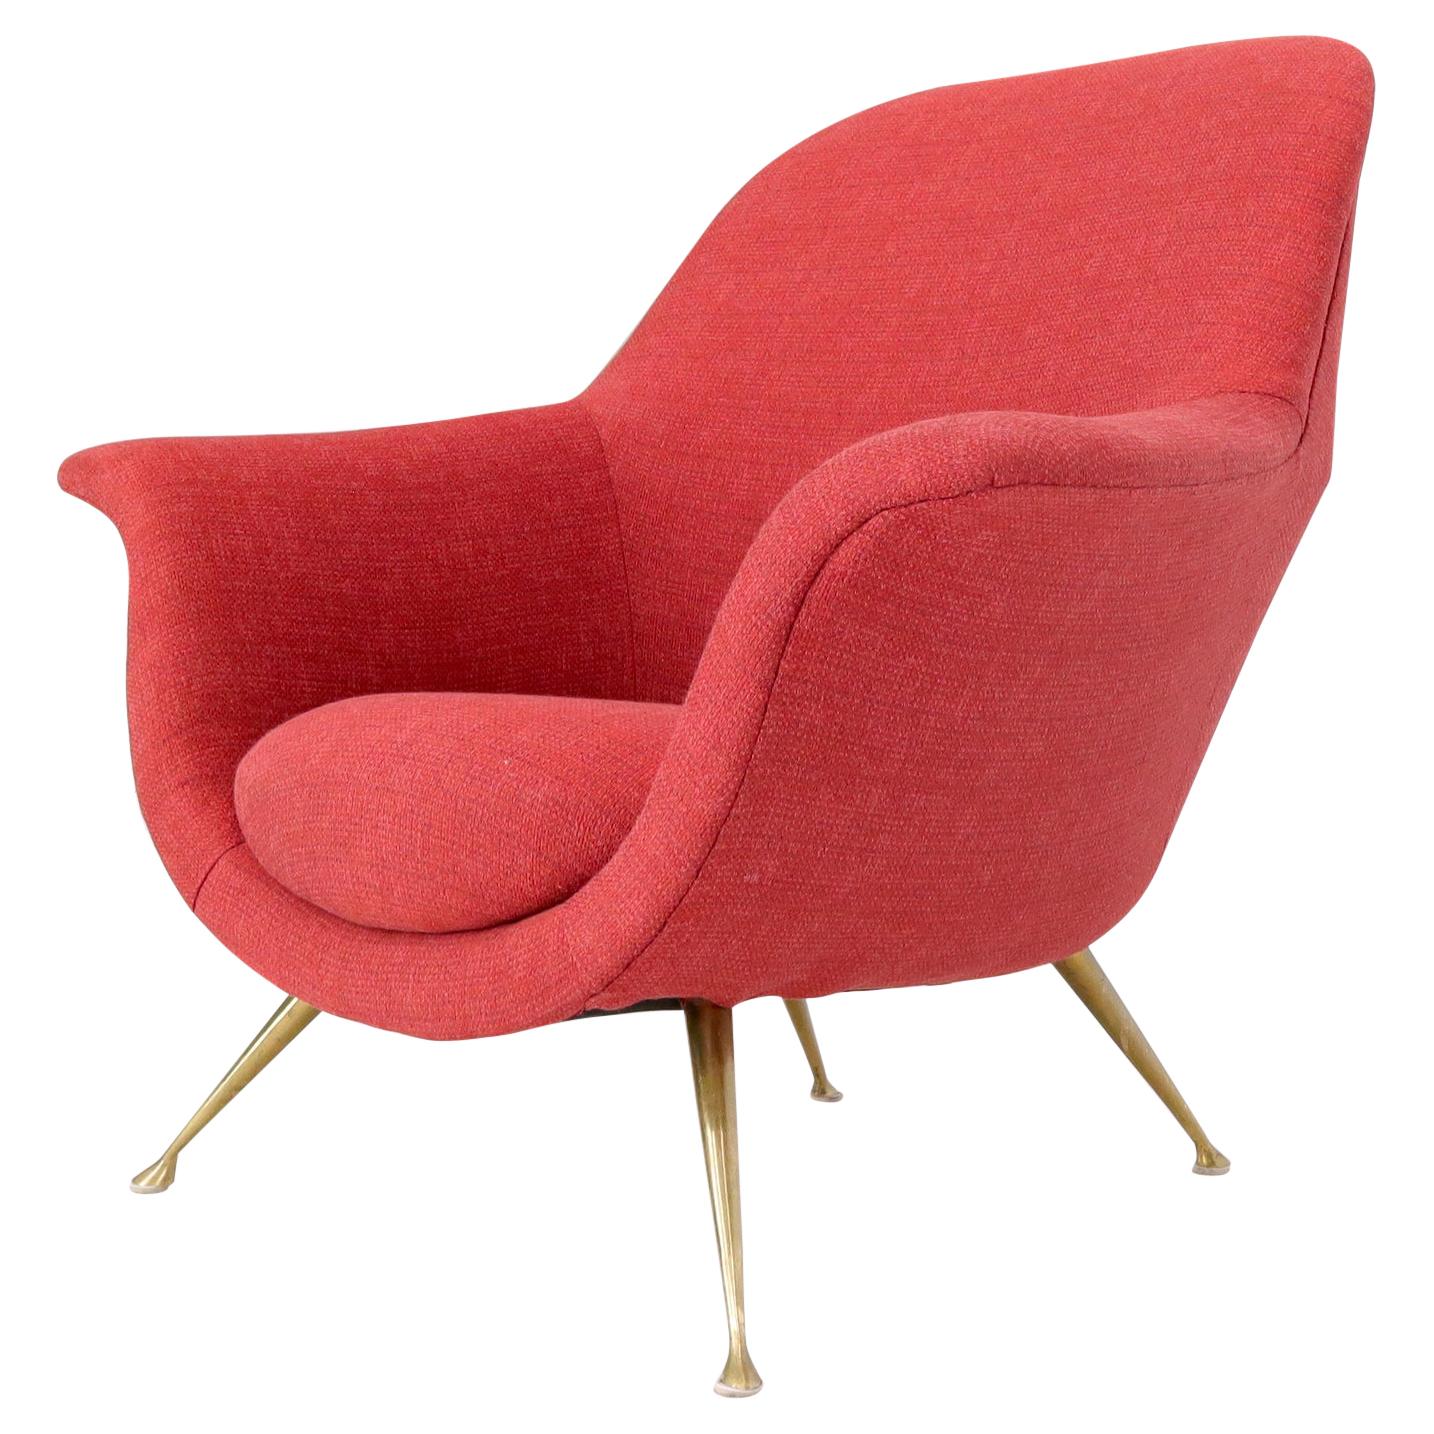 Italian Mid-Century Modern New Red Upholstery Lounge Chair on Solid Brass Legs